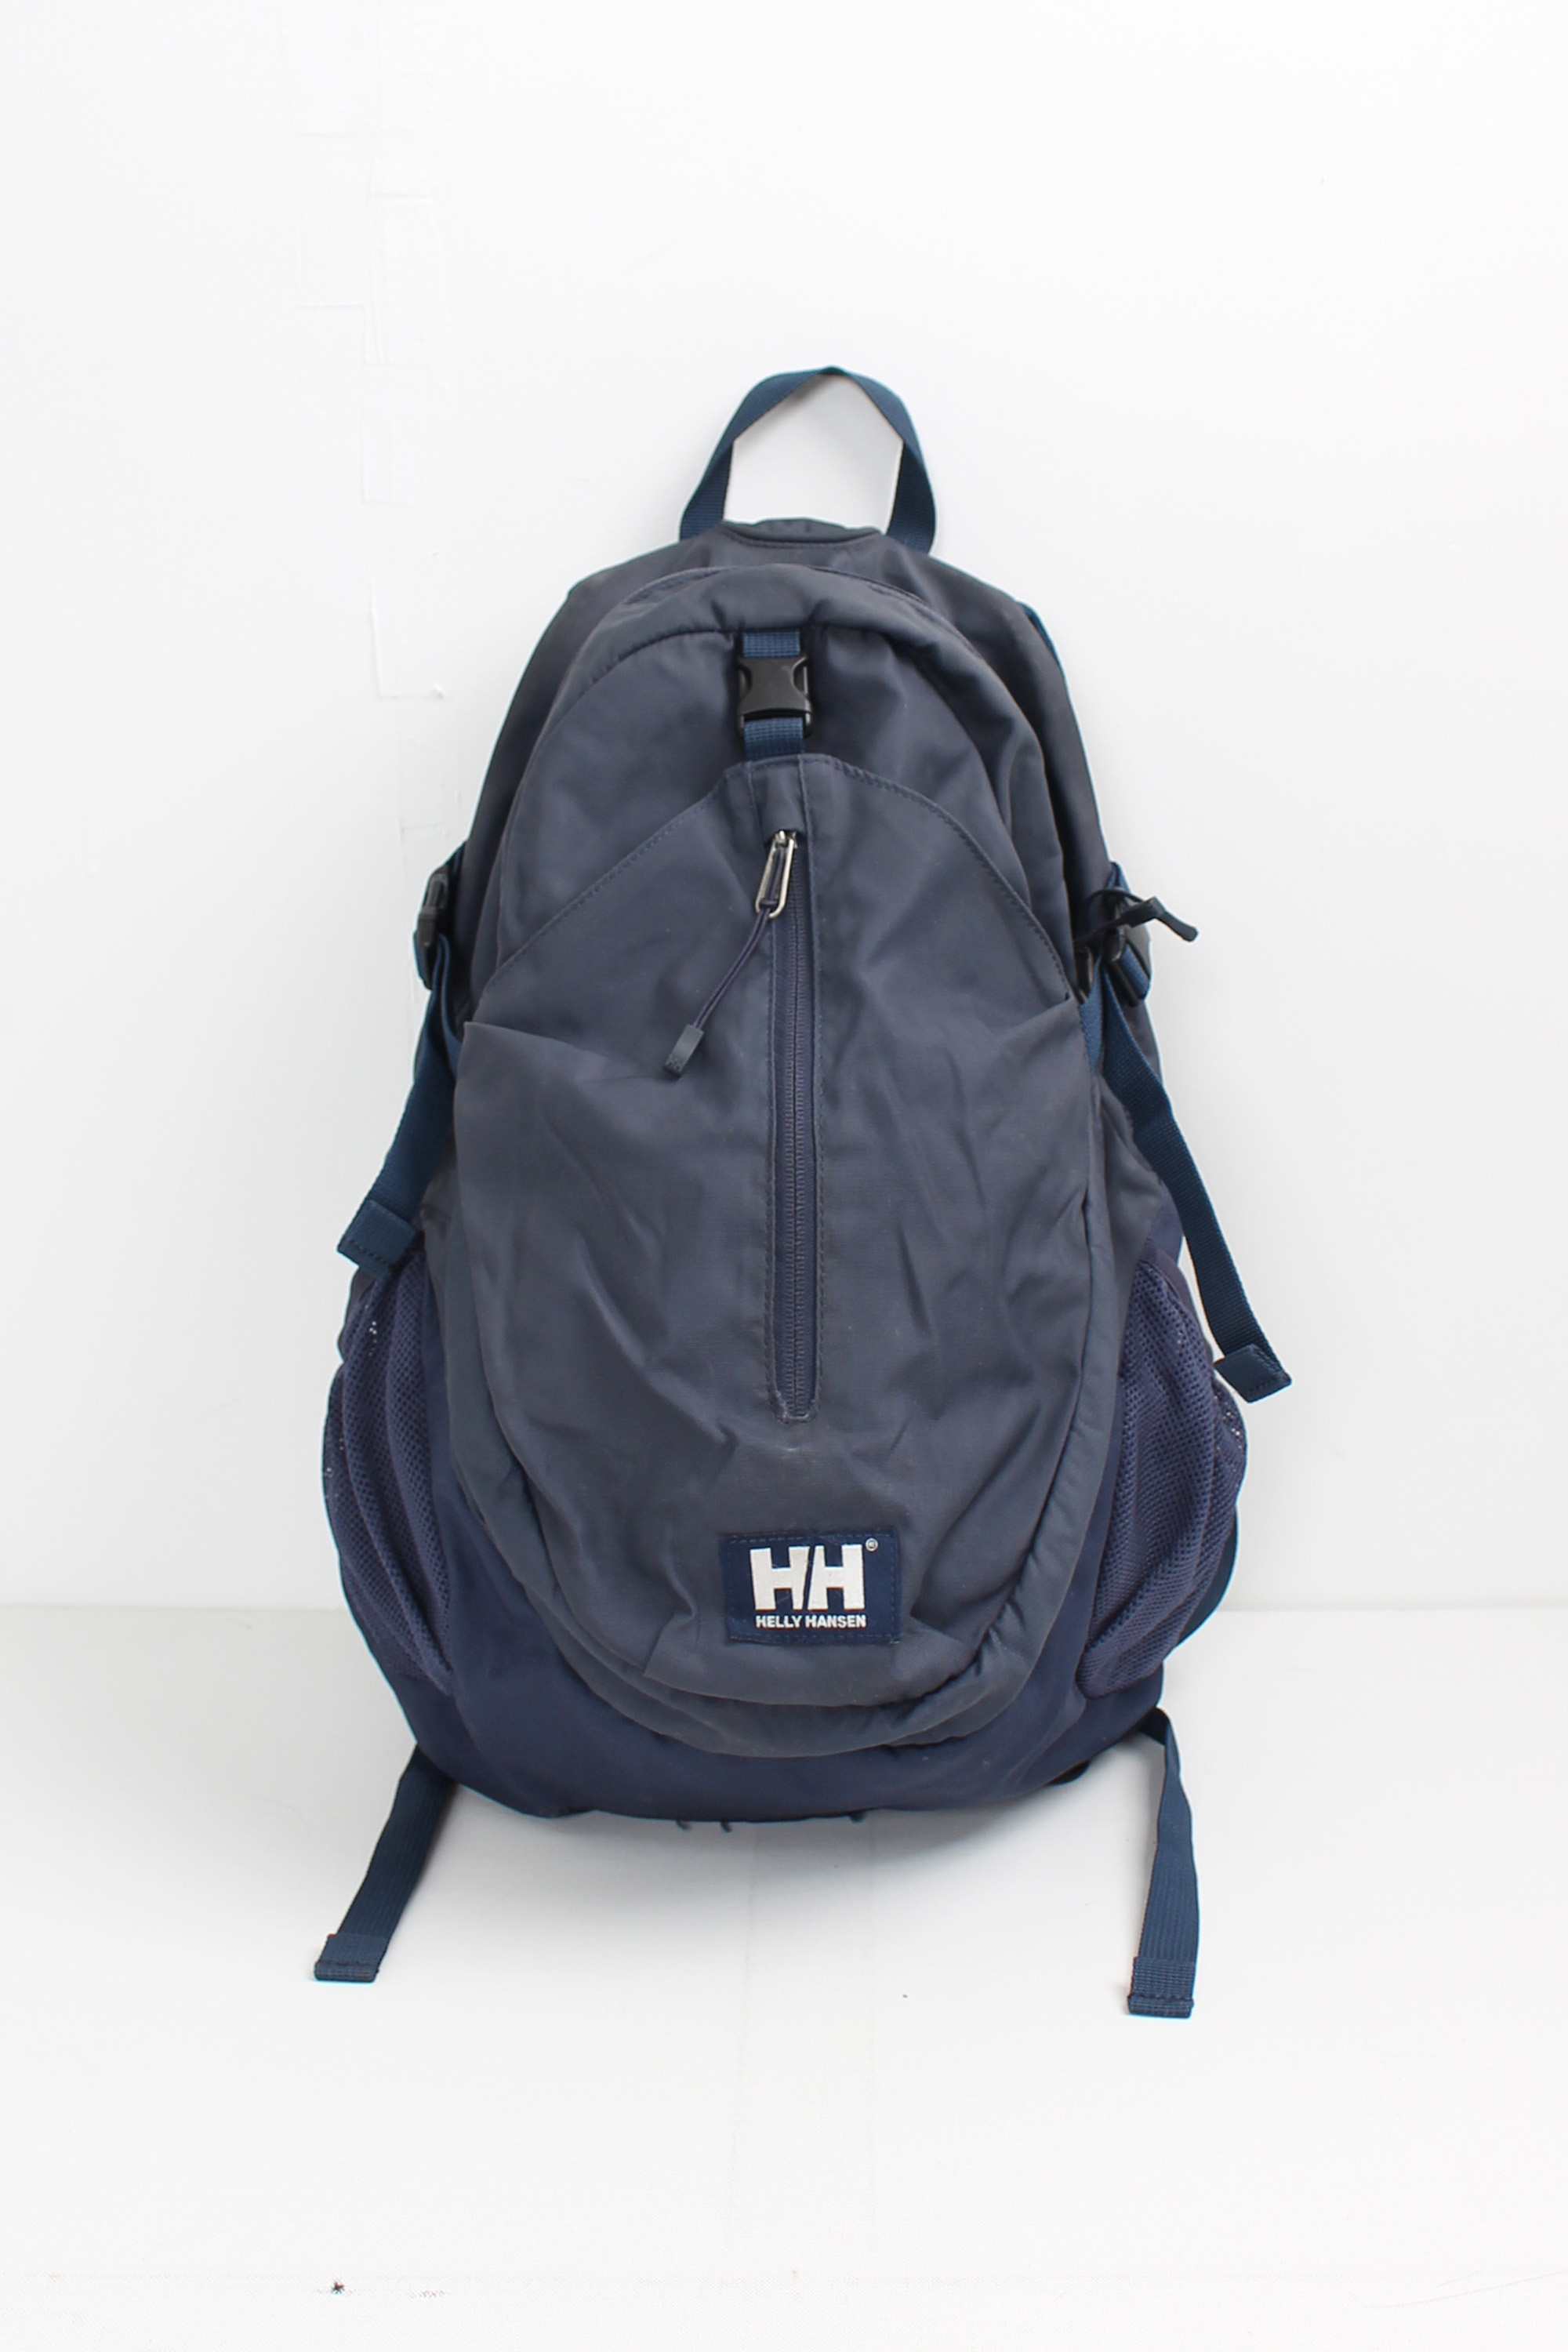 Helly Hansen tracking backpack